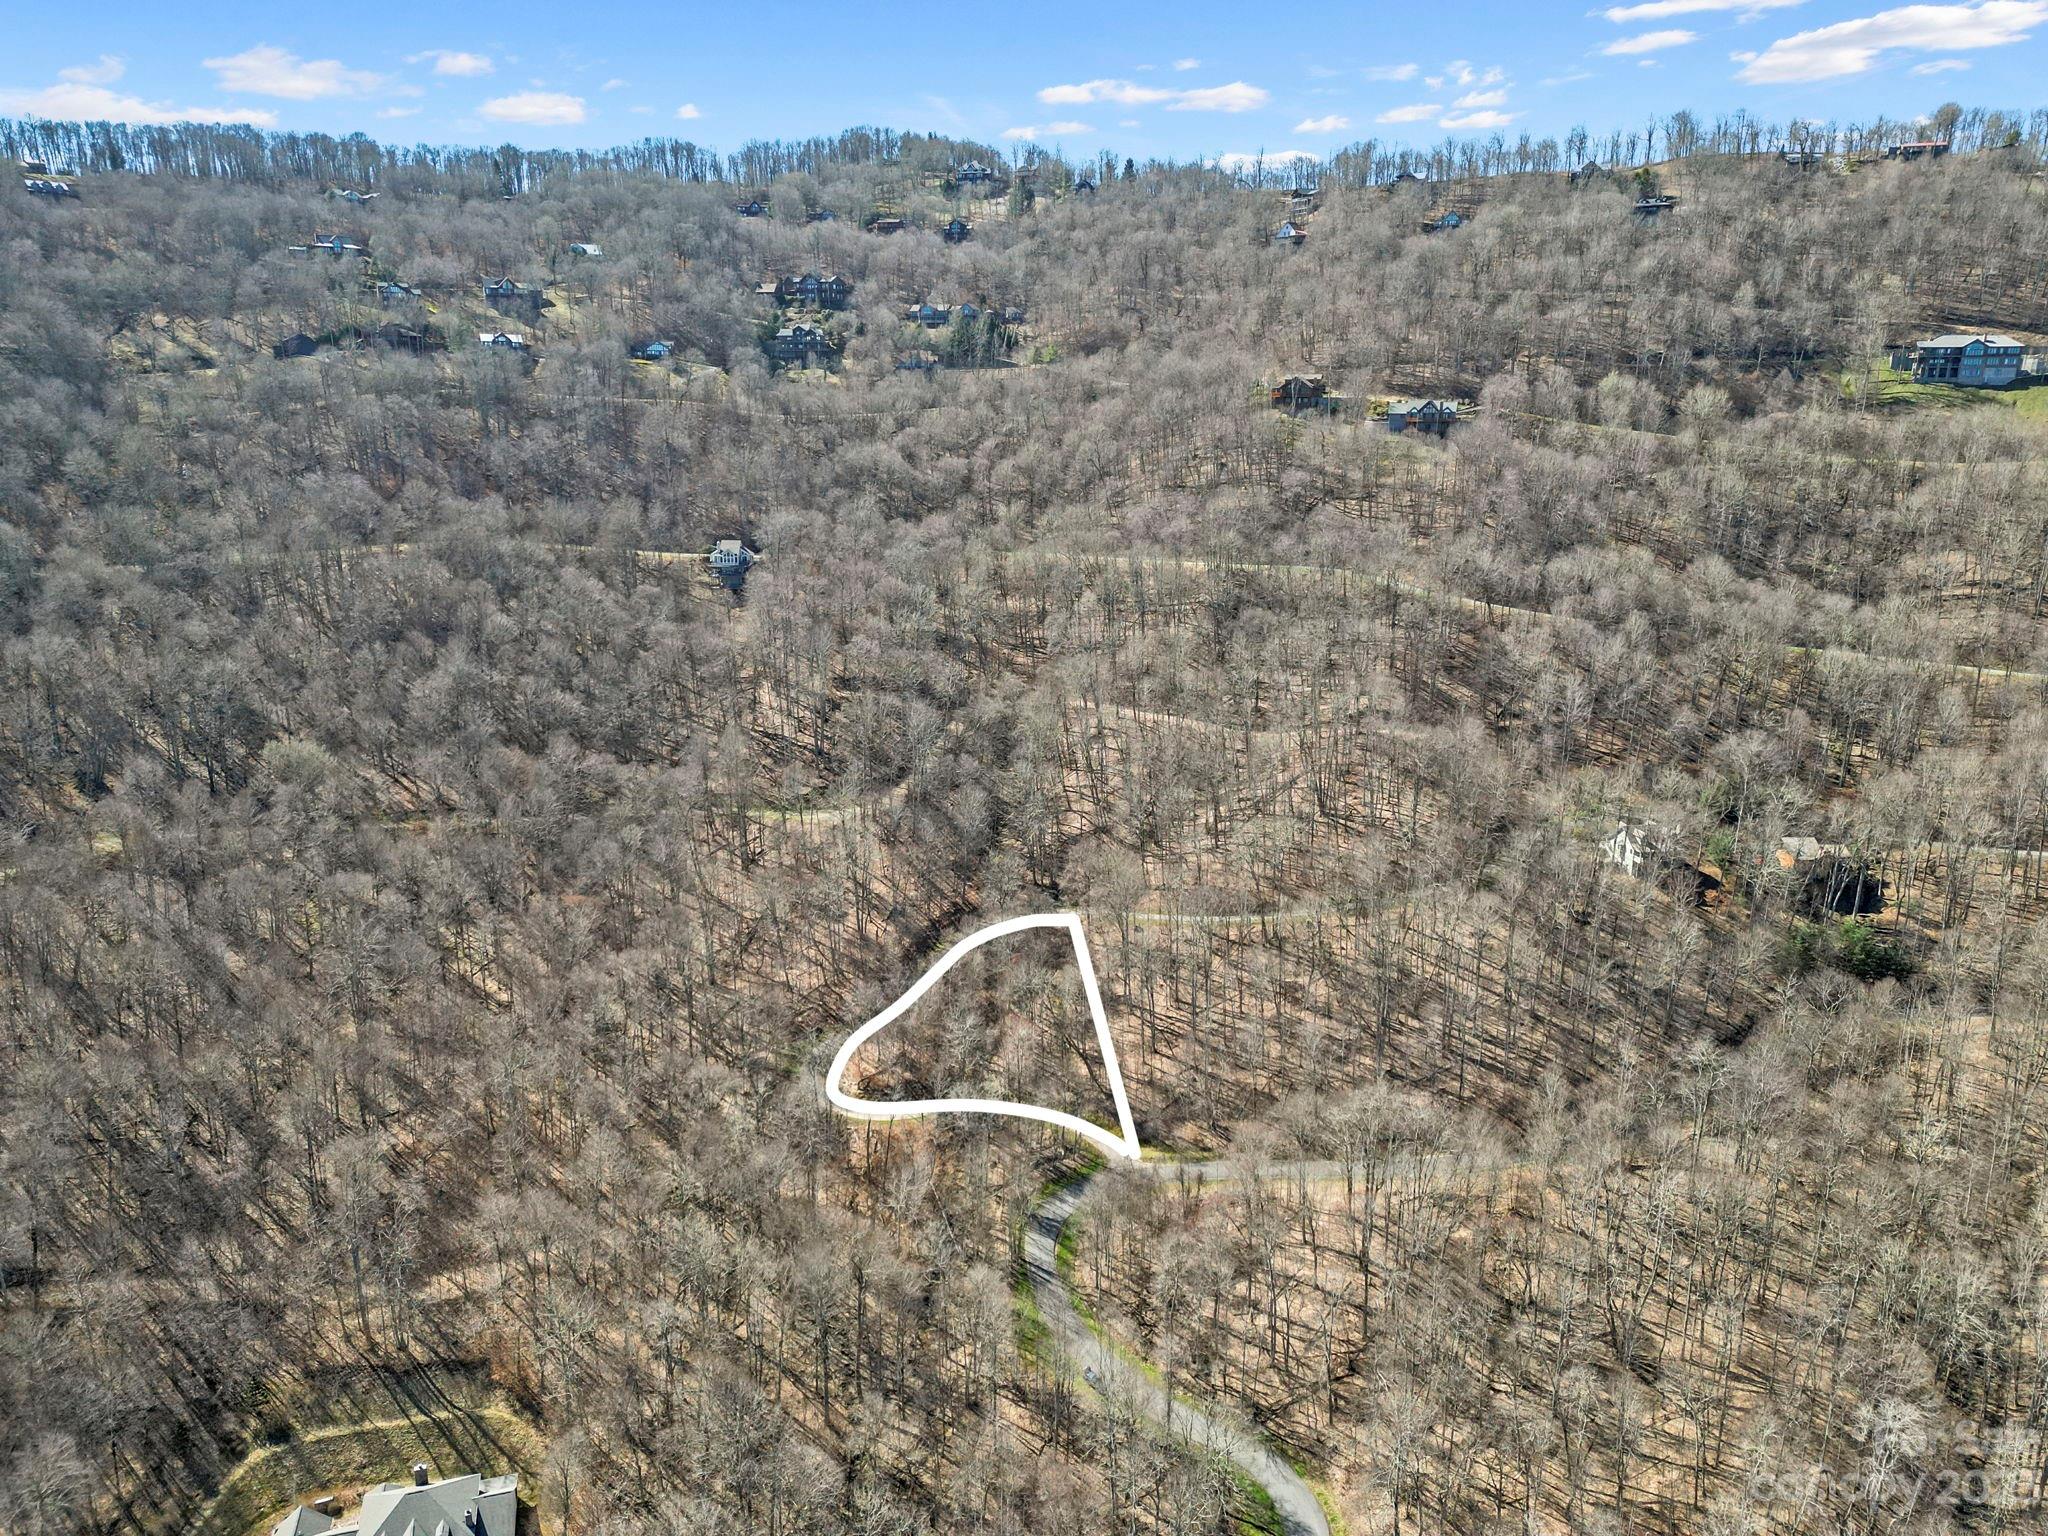 an aerial view of a house with a yard and mountain view in back